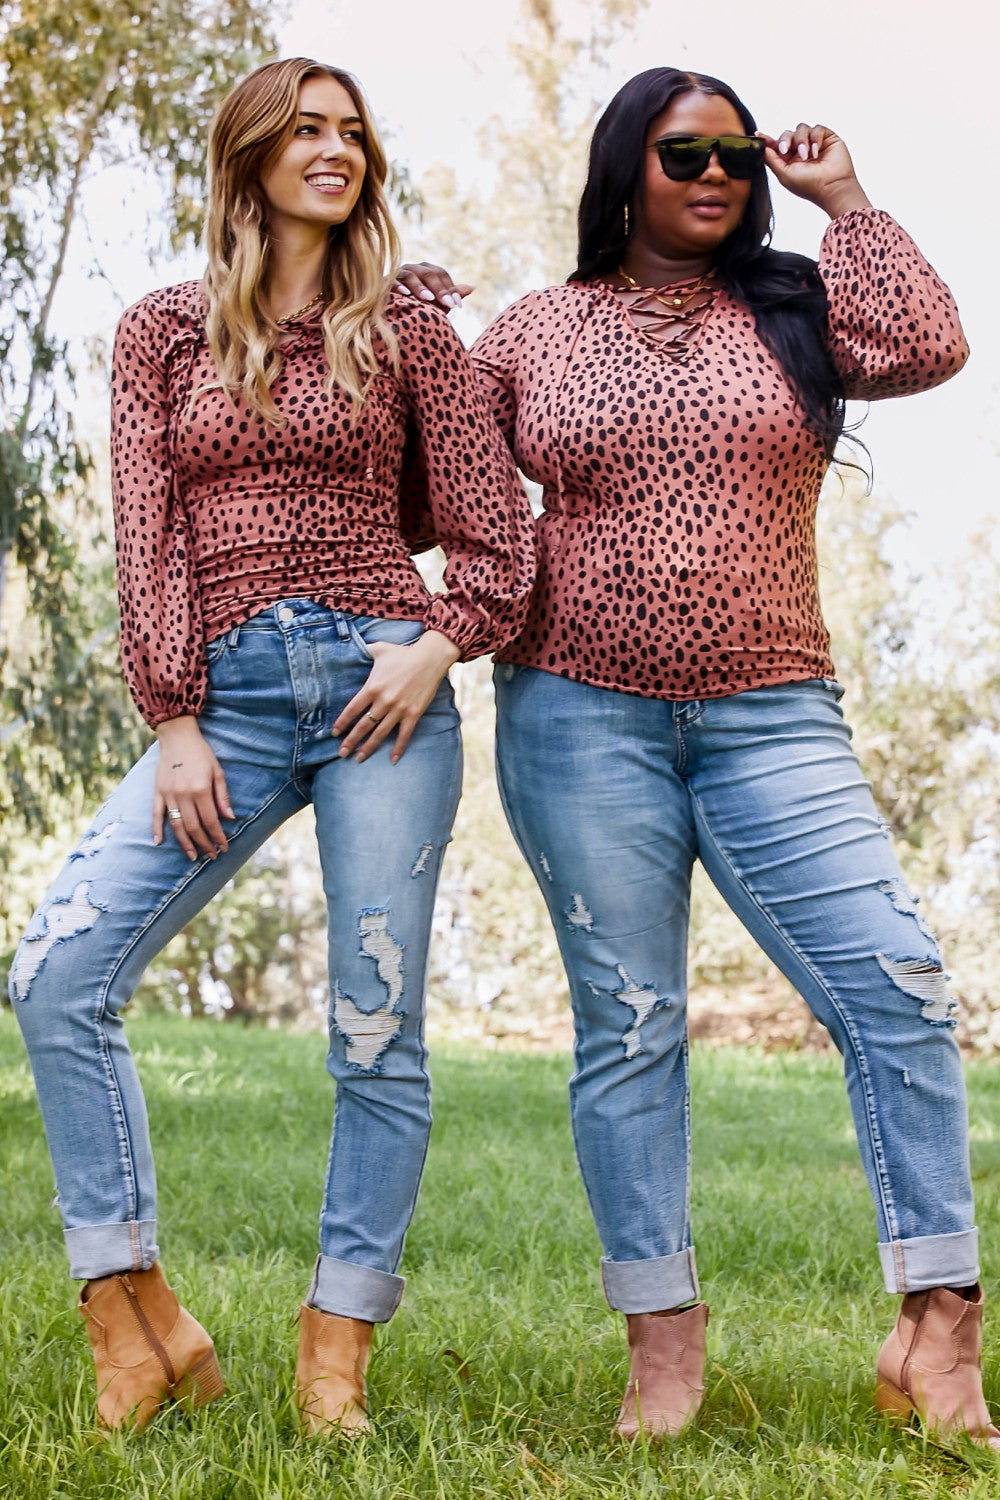 Sugarfox Wild Living  Full Size Leopard Lace-Up Top